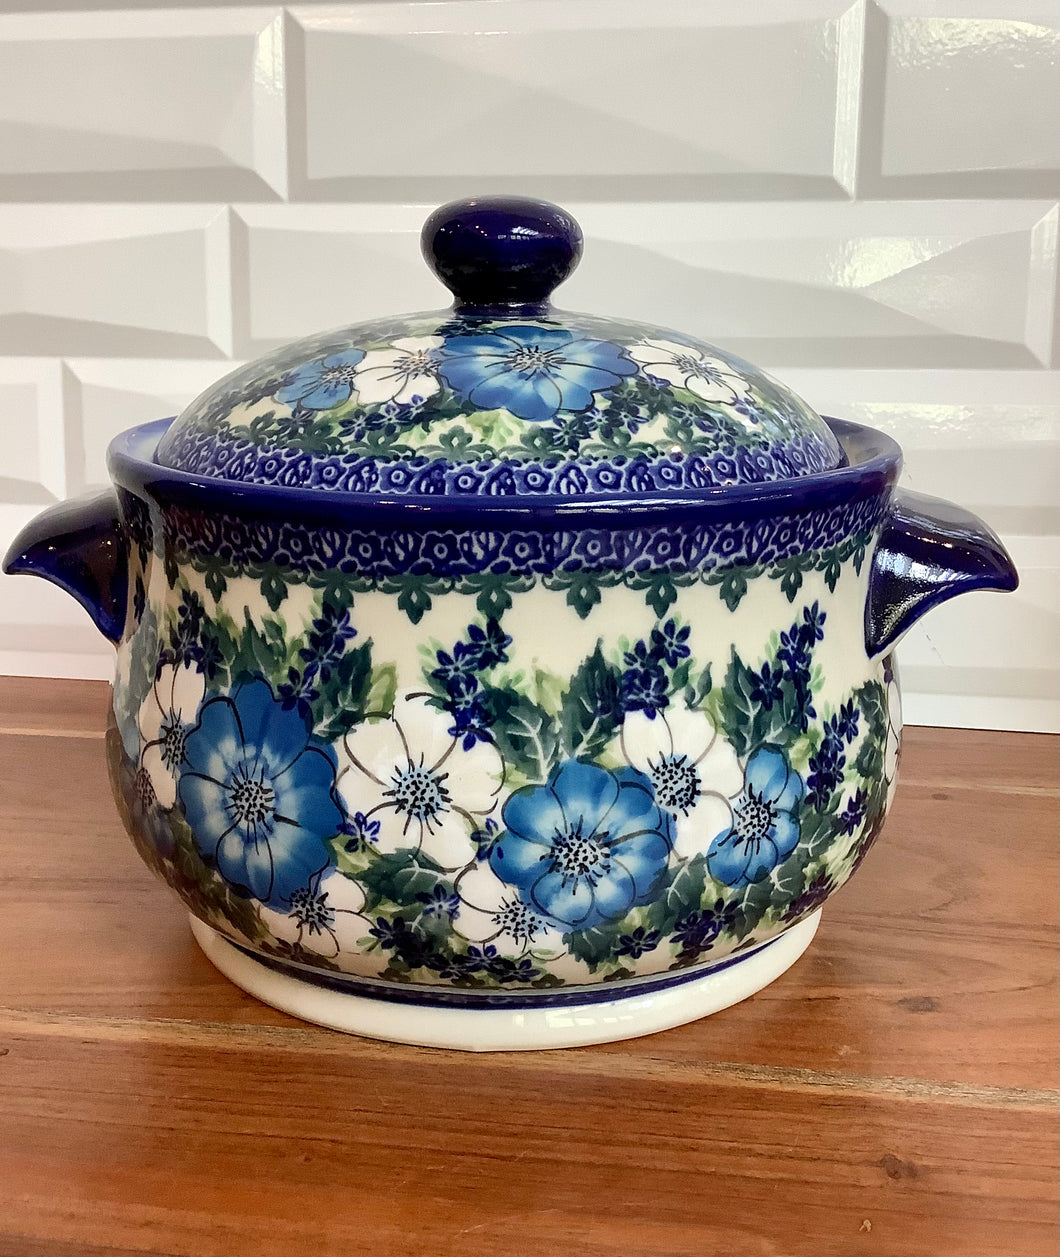 Kalich Blue and White Flower Soup Tureen